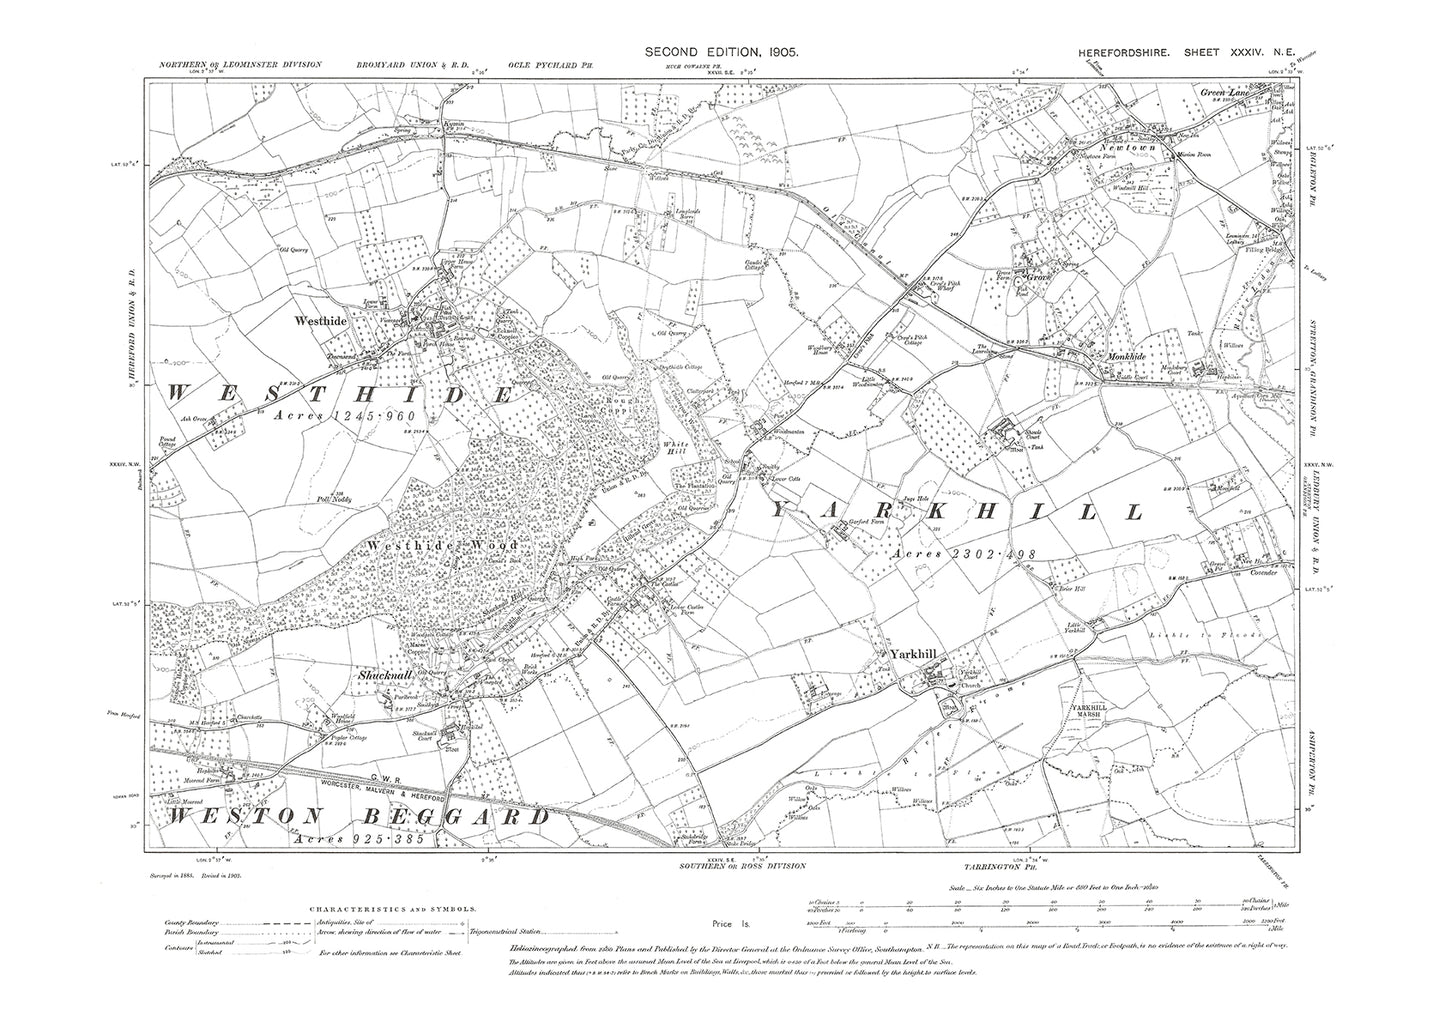 Old OS map dated 1905, showing Westhide, Yarkhall, Shucknall in Herefordshire - 34NE